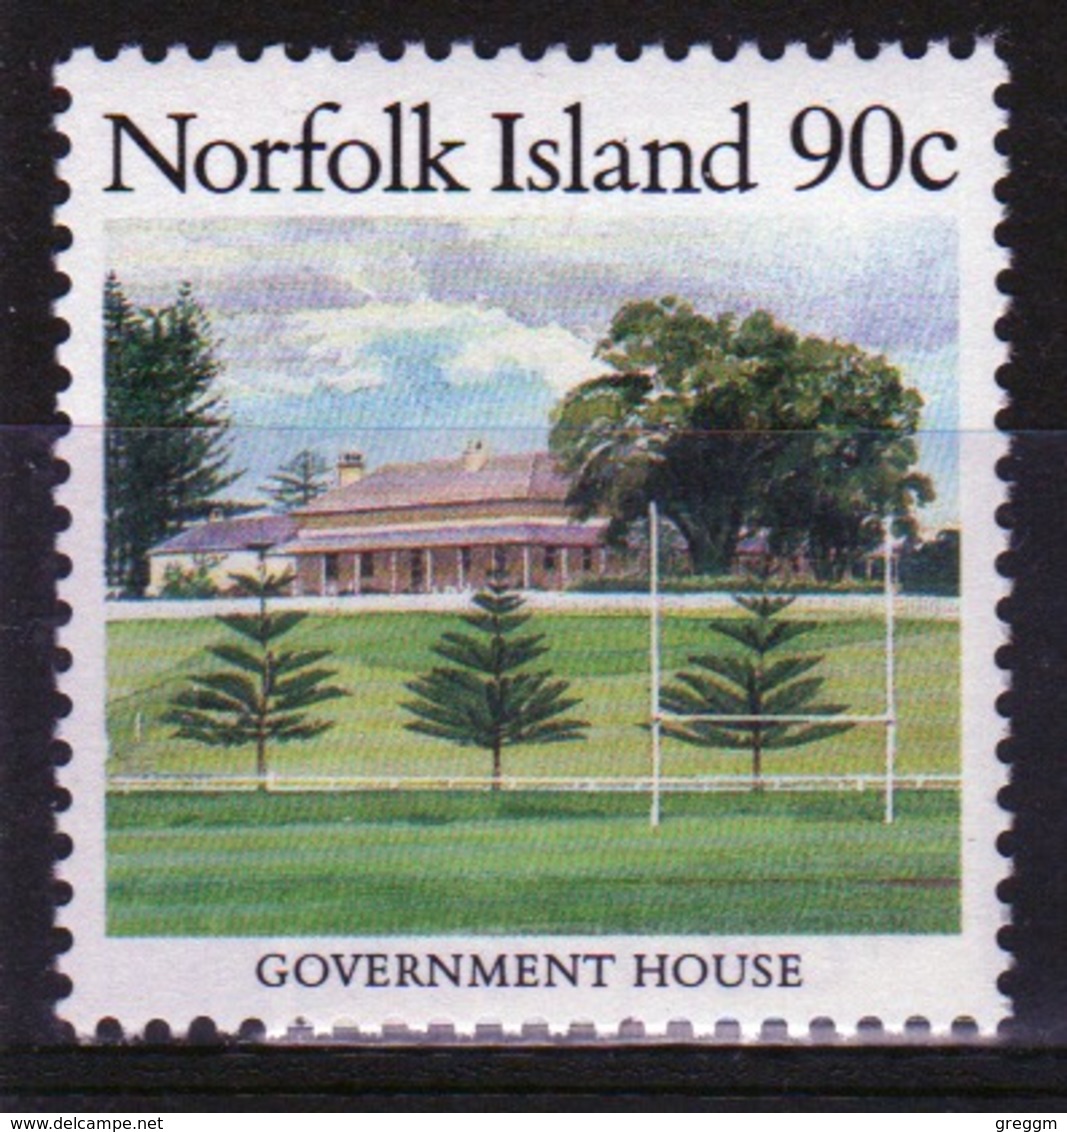 Norfolk Island Single 90c Definitive Stamp From The 1987 Island Scenes. - Norfolk Island